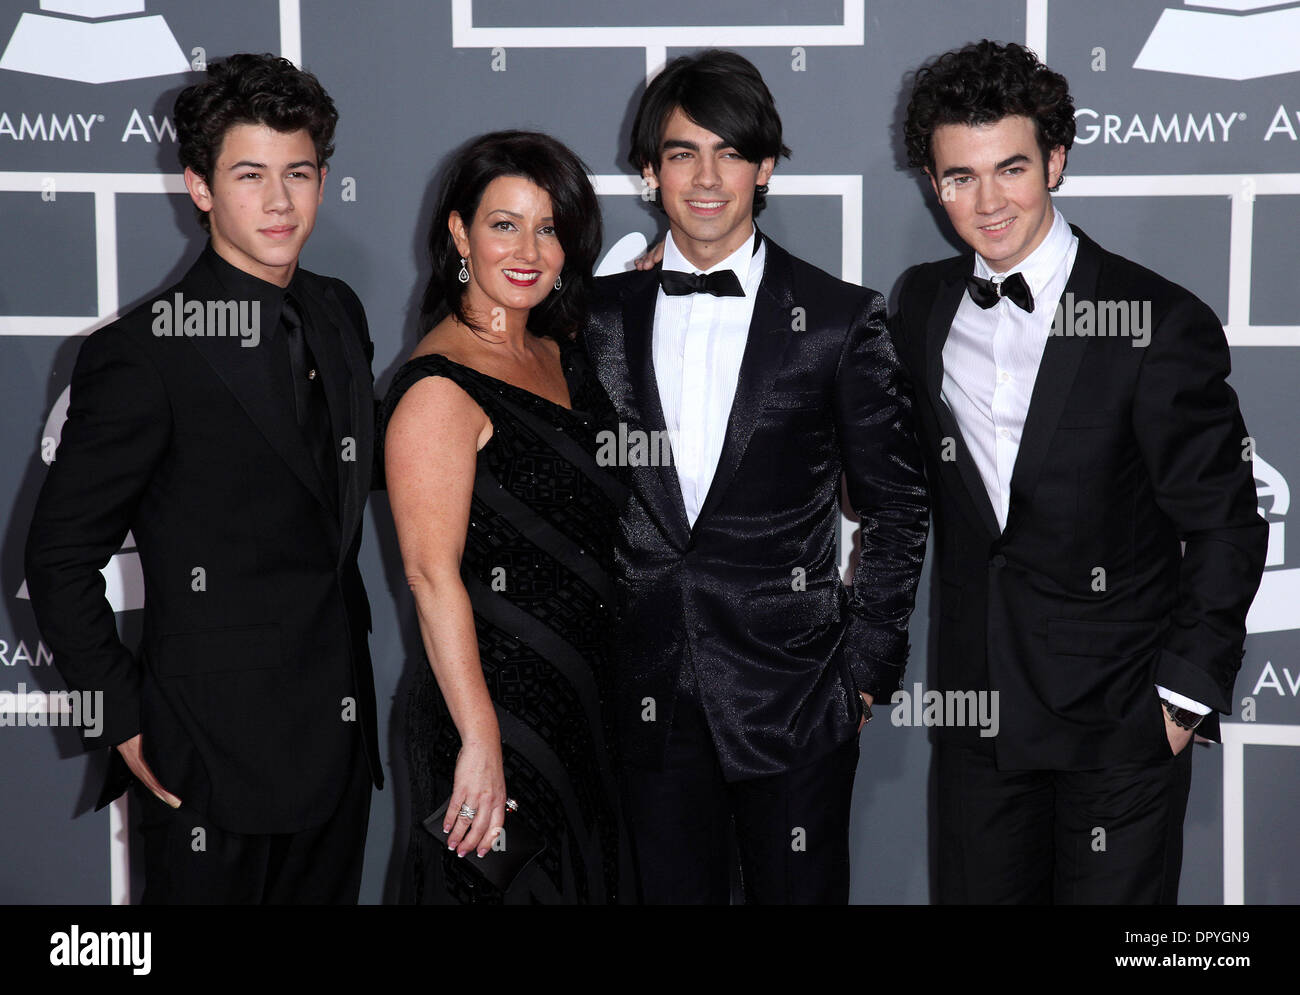 Feb 08, 2009 - Los Angeles, California, USA - Music group Jonas Brothers - (L-R) NICK JONAS, JOE JONAS and KEVIN JONAS with mother DENISE JONAS arriving on the red carpet at the 51st Grammy Awards held at the Staples Center in Los Angeles. (Credit Image: © Lisa O'Connor/ZUMA Press) Stock Photo